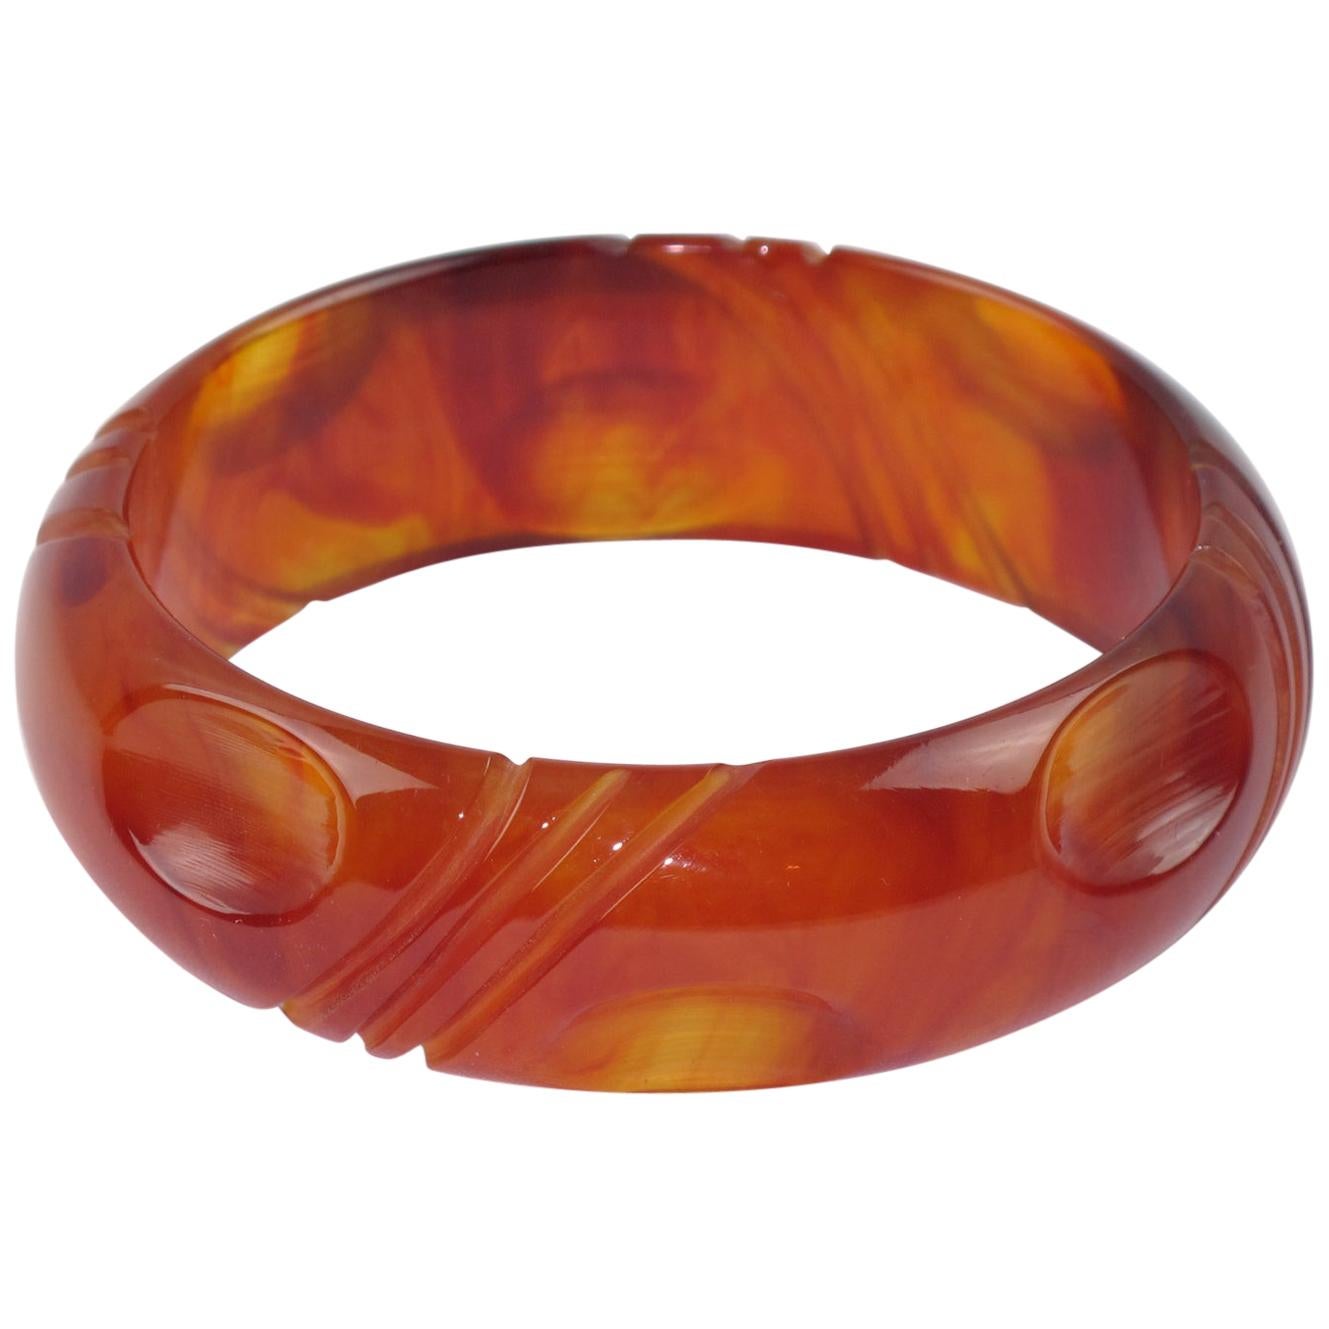 Elegant red tea amber marble Bakelite bracelet bangle. Chunky domed shape with a geometric deeply carved design all around. Red tea amber marble color with translucence and cloudy swirling. 
Measurements: Inside across is 2.63 in diameter (6.7 cm) -